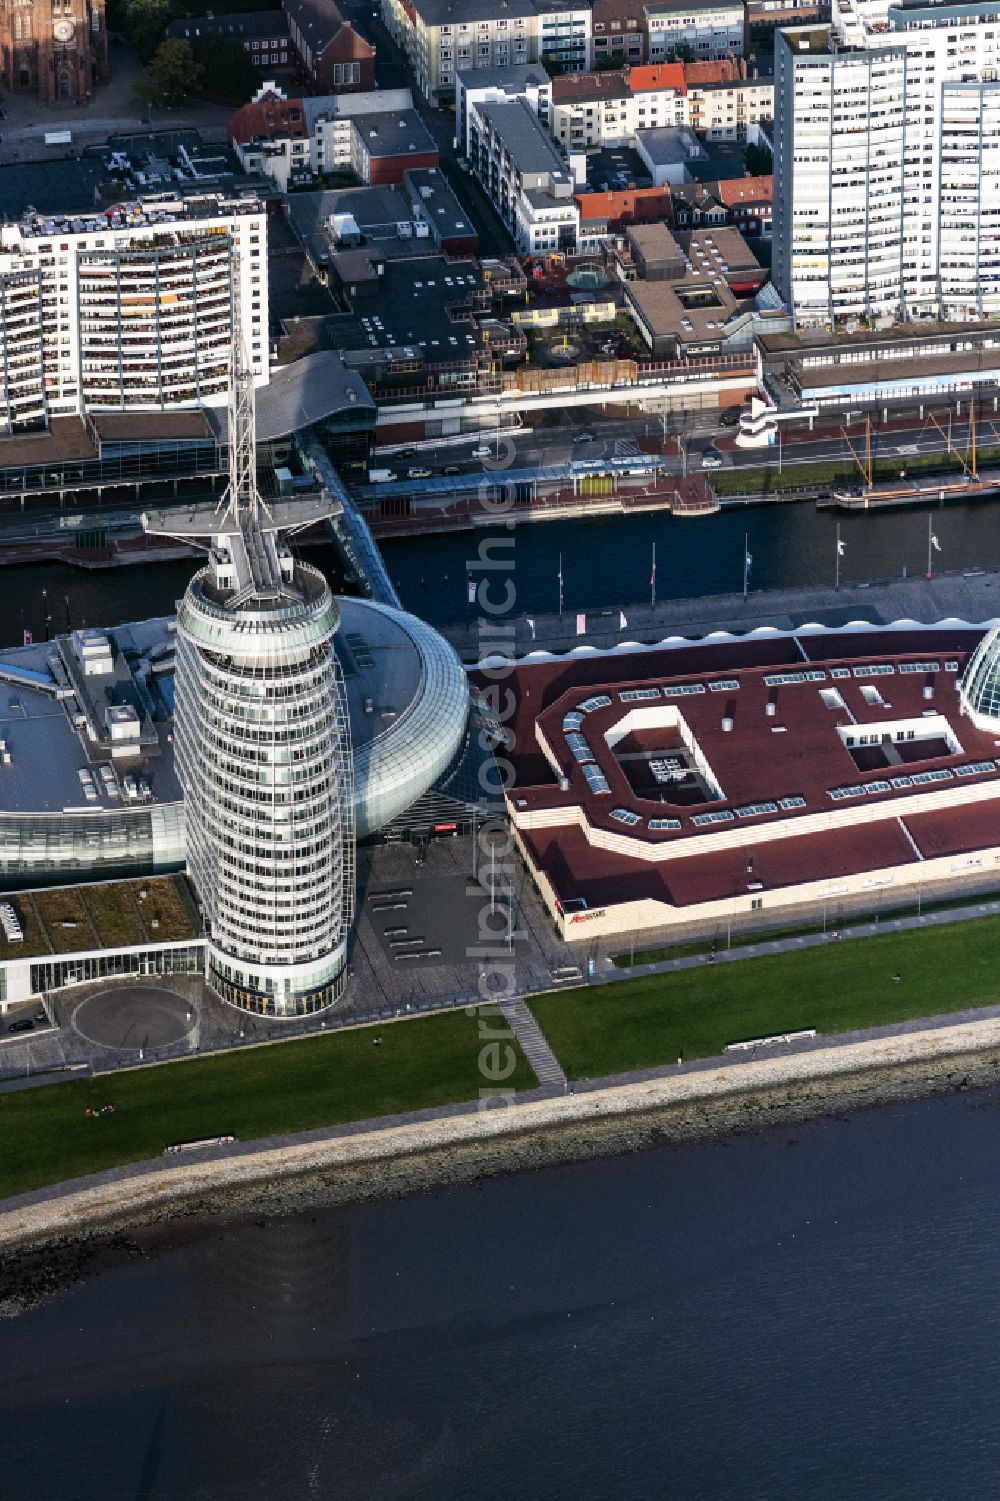 Bremerhaven from above - Atlantic Hotel Sail City and Klimahaus in Bremerhaven in the state of Bremen. The four star hotel with its bent front is located adjacent to the exhibition space of Klimahaus Bremerhaven 8 Ost and on the riverbank of the Weser